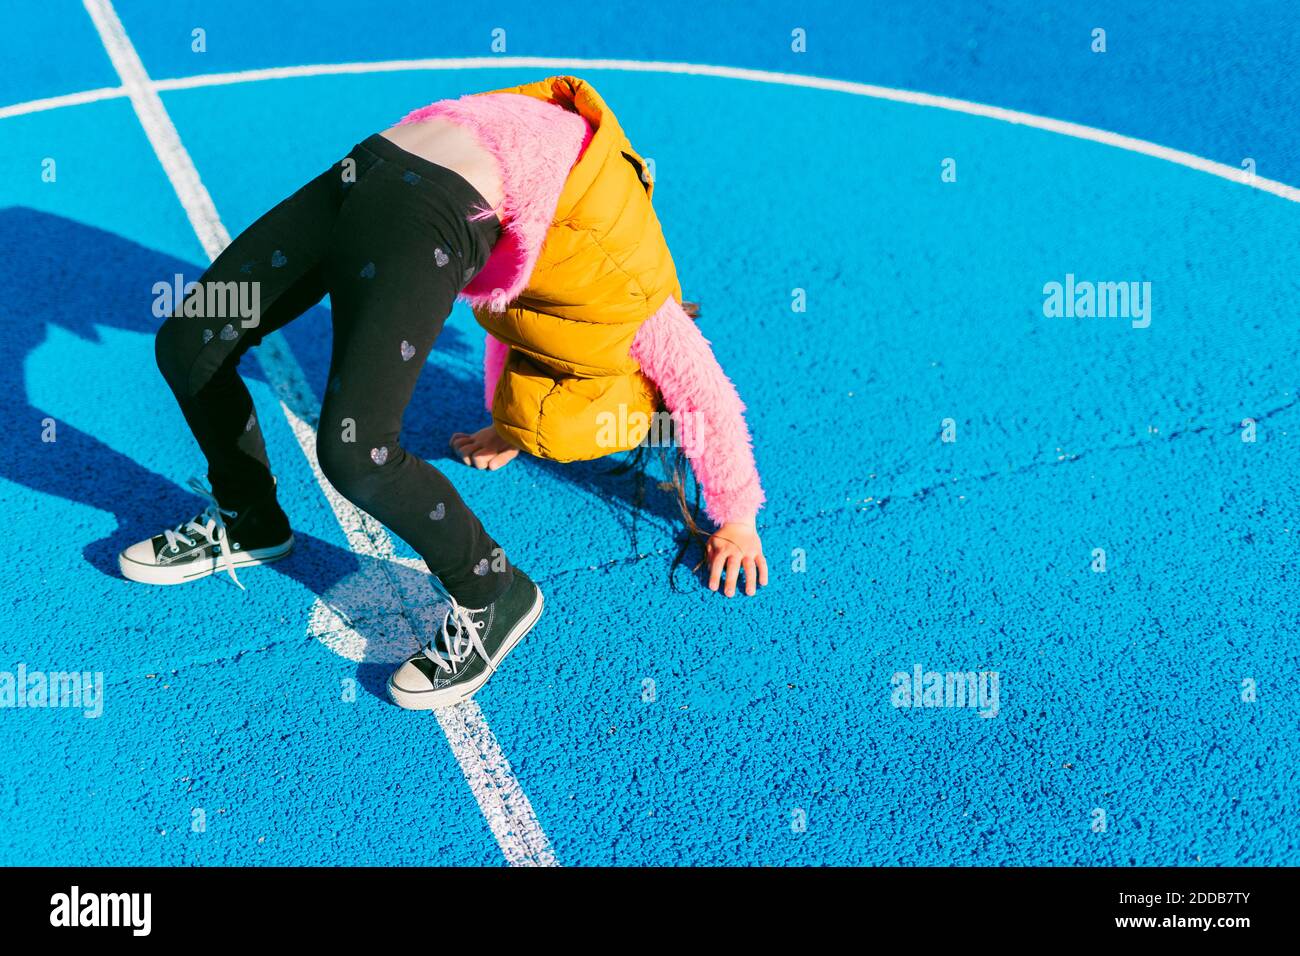 Girl doing acrobatic activity on soccer court during sunny day Stock Photo